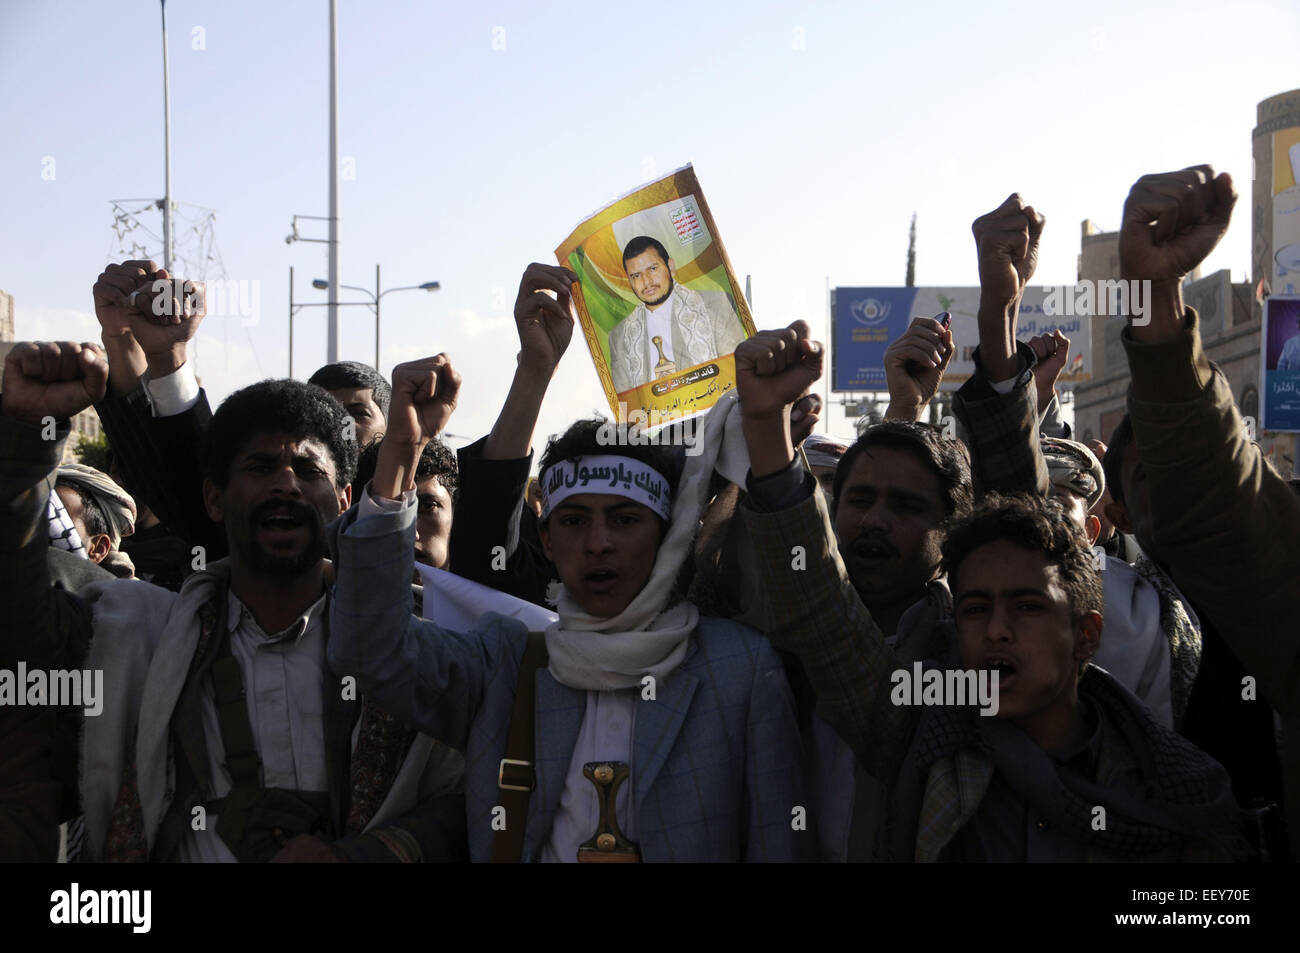 Sanaa, Yemen. 23rd Jan, 2015. Followers of the Shiite Houthi group shout slogans during a demonstration in Sanaa, Yemen, on Jan. 23, 2015. Yemeni President Abd-Rabbu Mansour Hadi on Thursday night submitted his resignation to the parliament amid standoff with the Shiite Houthi group who control the capital. © Hani Ali/Xinhua/Alamy Live News Stock Photo